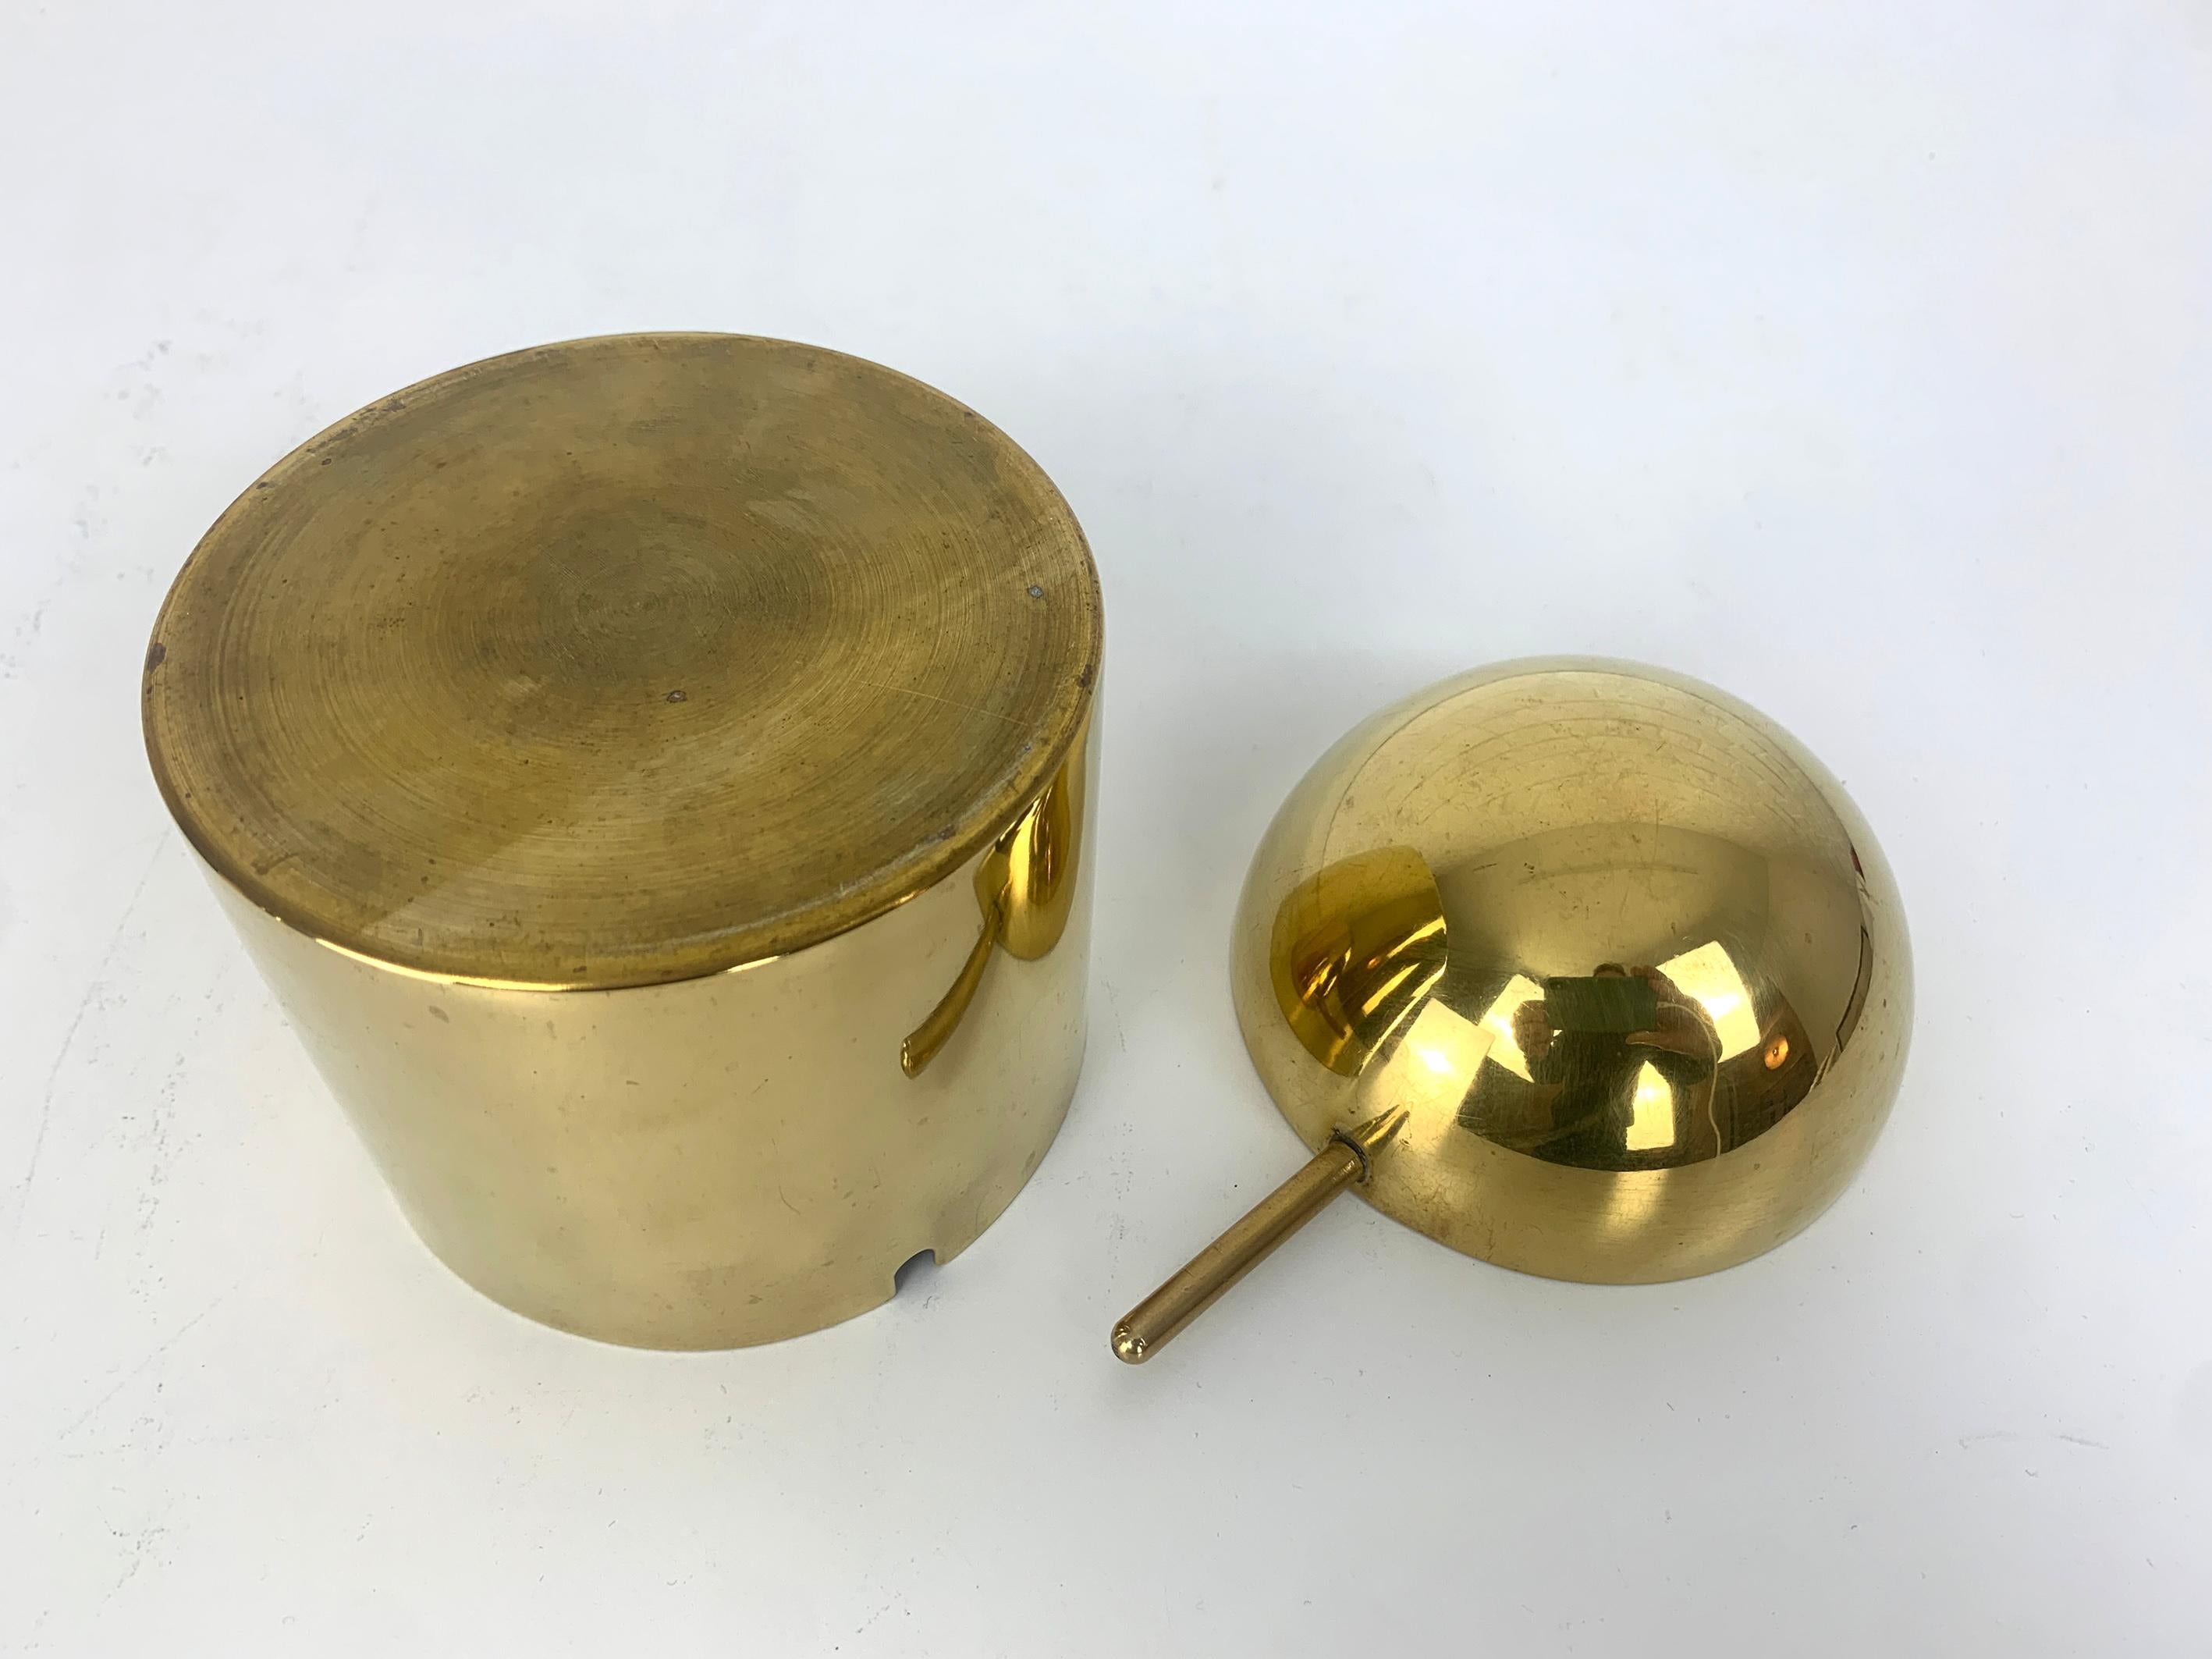 Large Brass Ashtray by Arne Jacobsen for Stelton, Cylinda-Line, 1960s For Sale 2